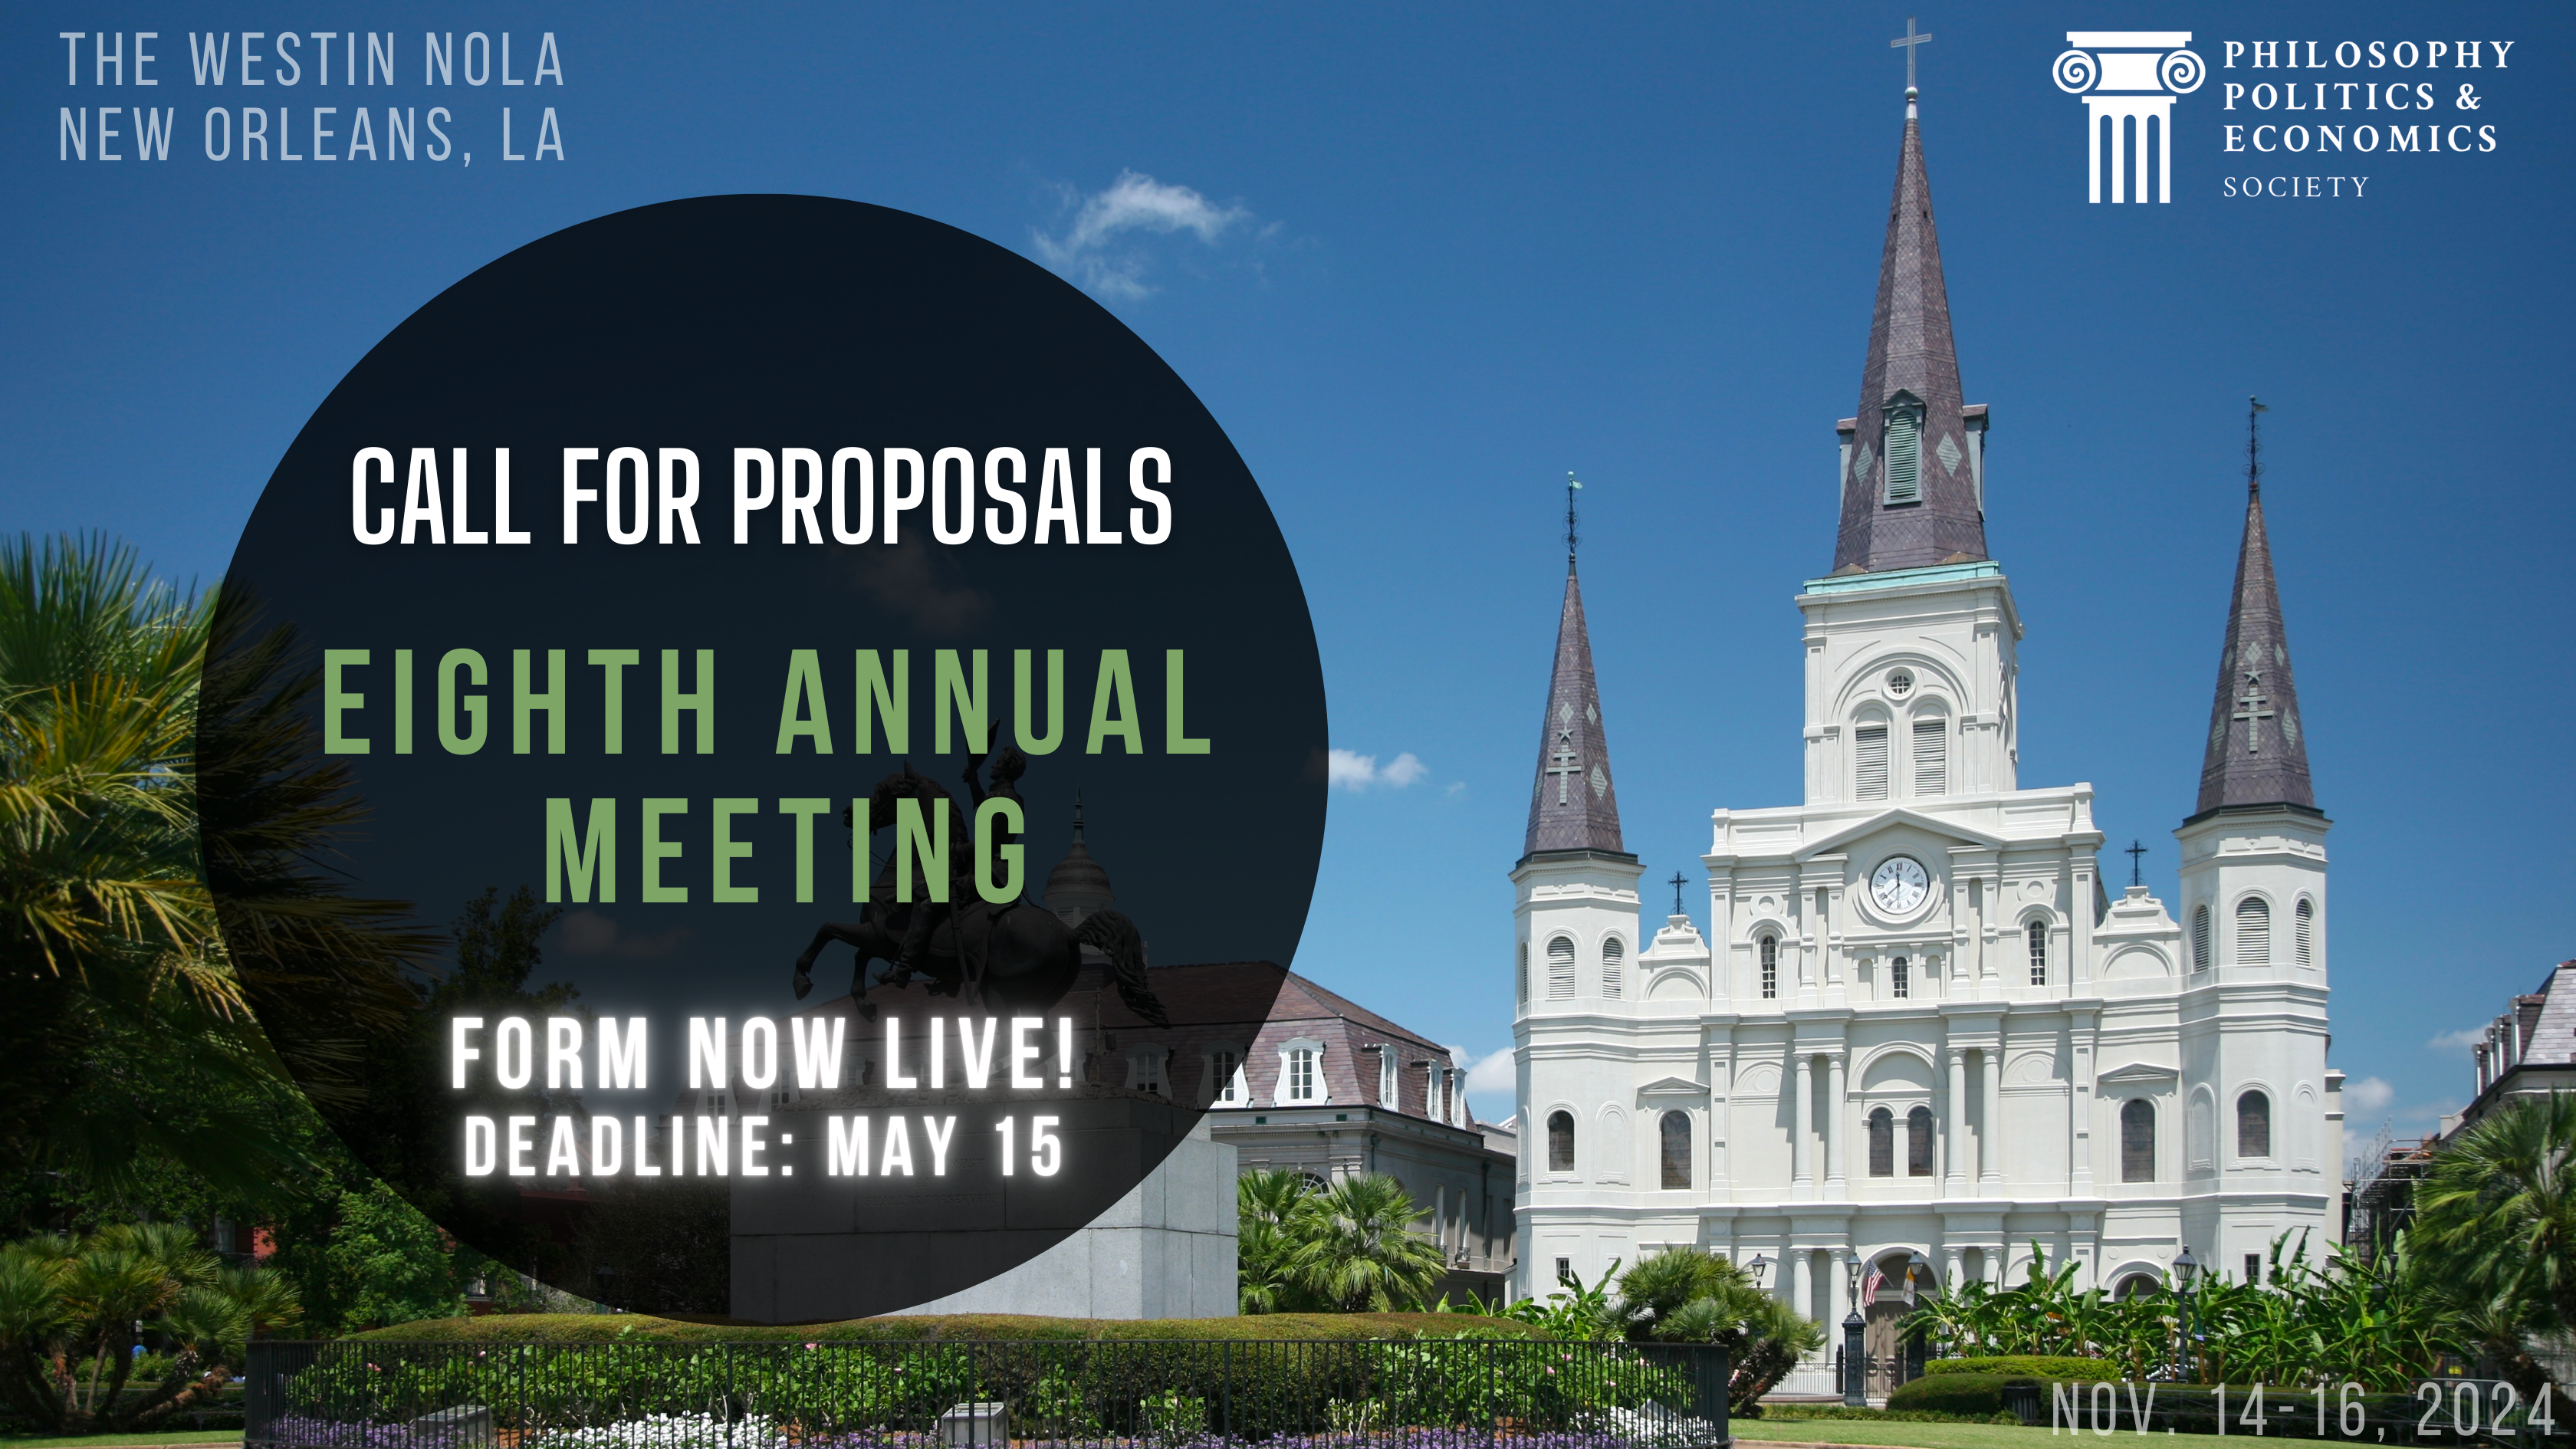 Call for Proposals, Eighth Annual Meeting - Form now live. Deadline: May 15